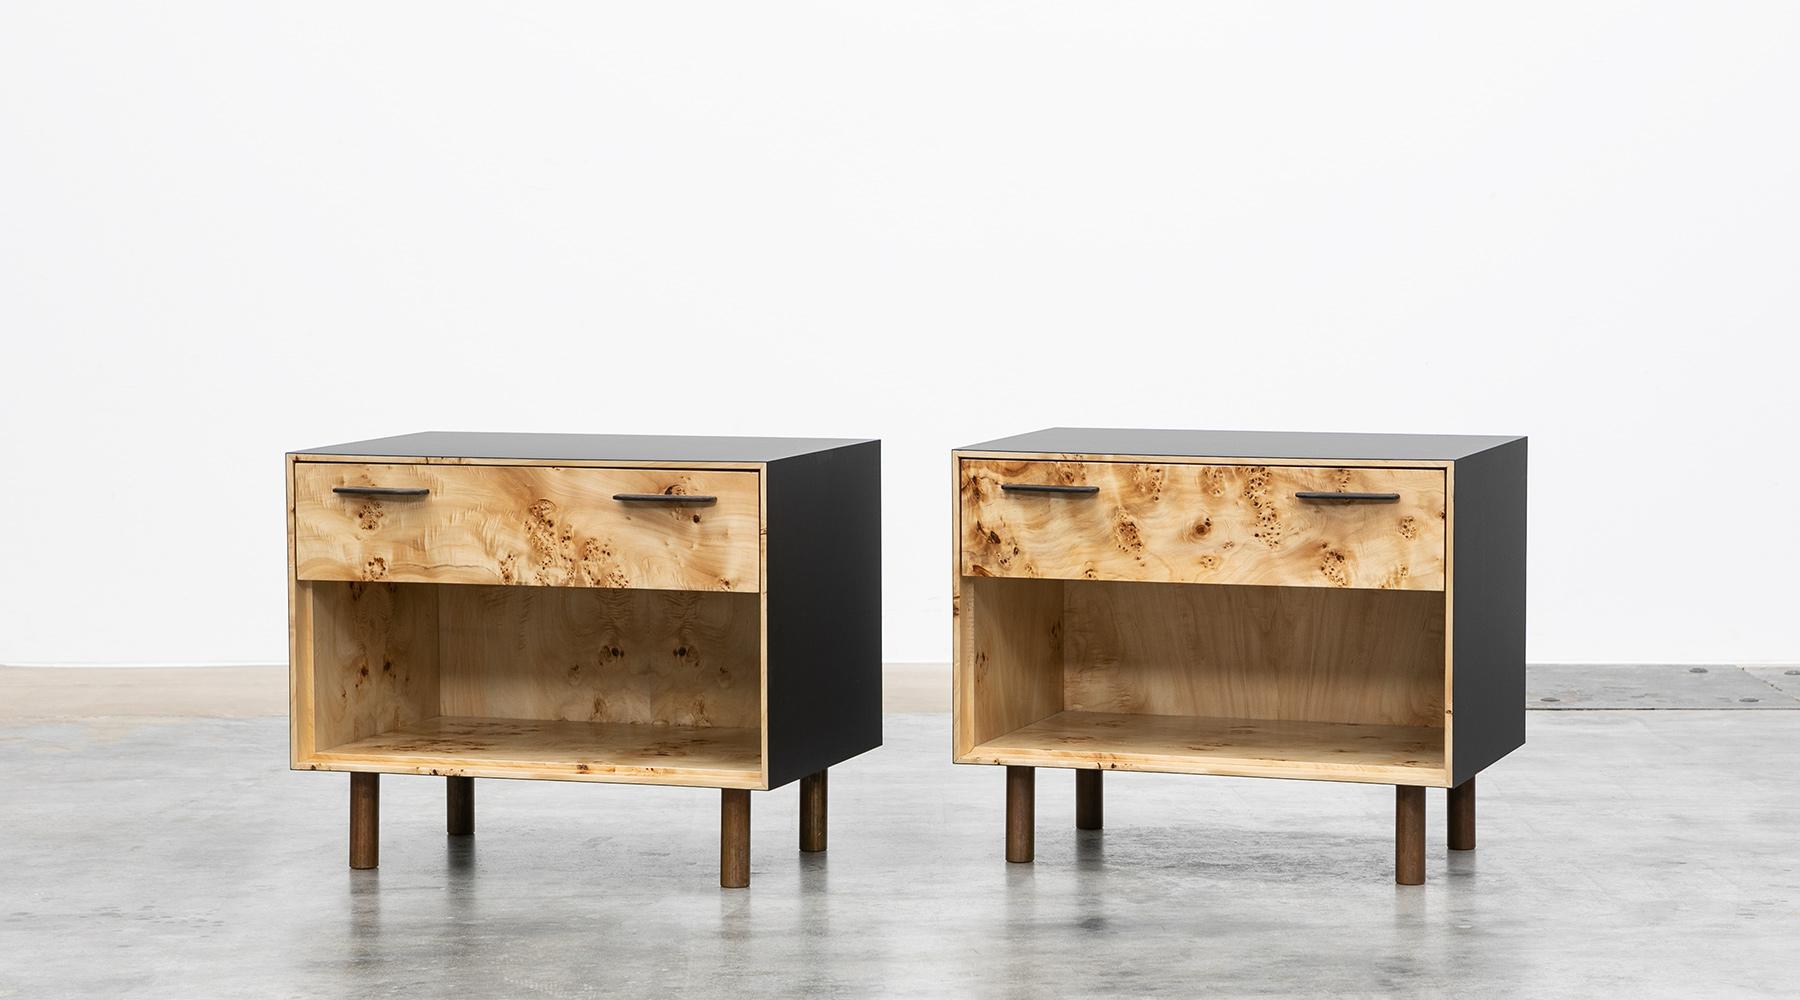 Pair of nightstands by contemporary German artist Johannes Hock, black HPL body, each case contains one drawer and stands on bronze feet. Manufactured by Atelier Johannes Hock.